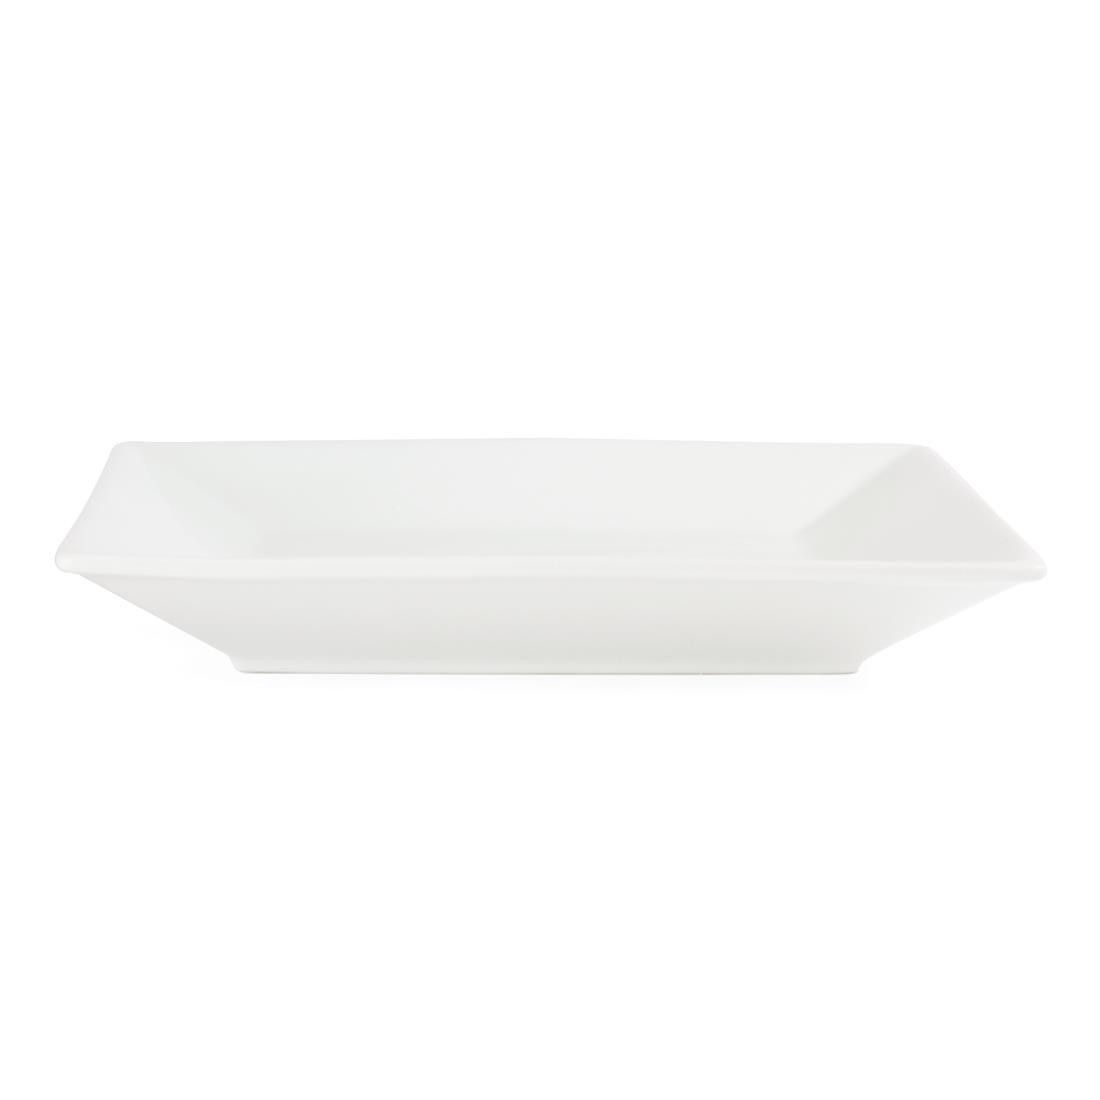 Olympia Whiteware Square Plates Wide Rim 250mm (Pack of 6) - C360  - 4